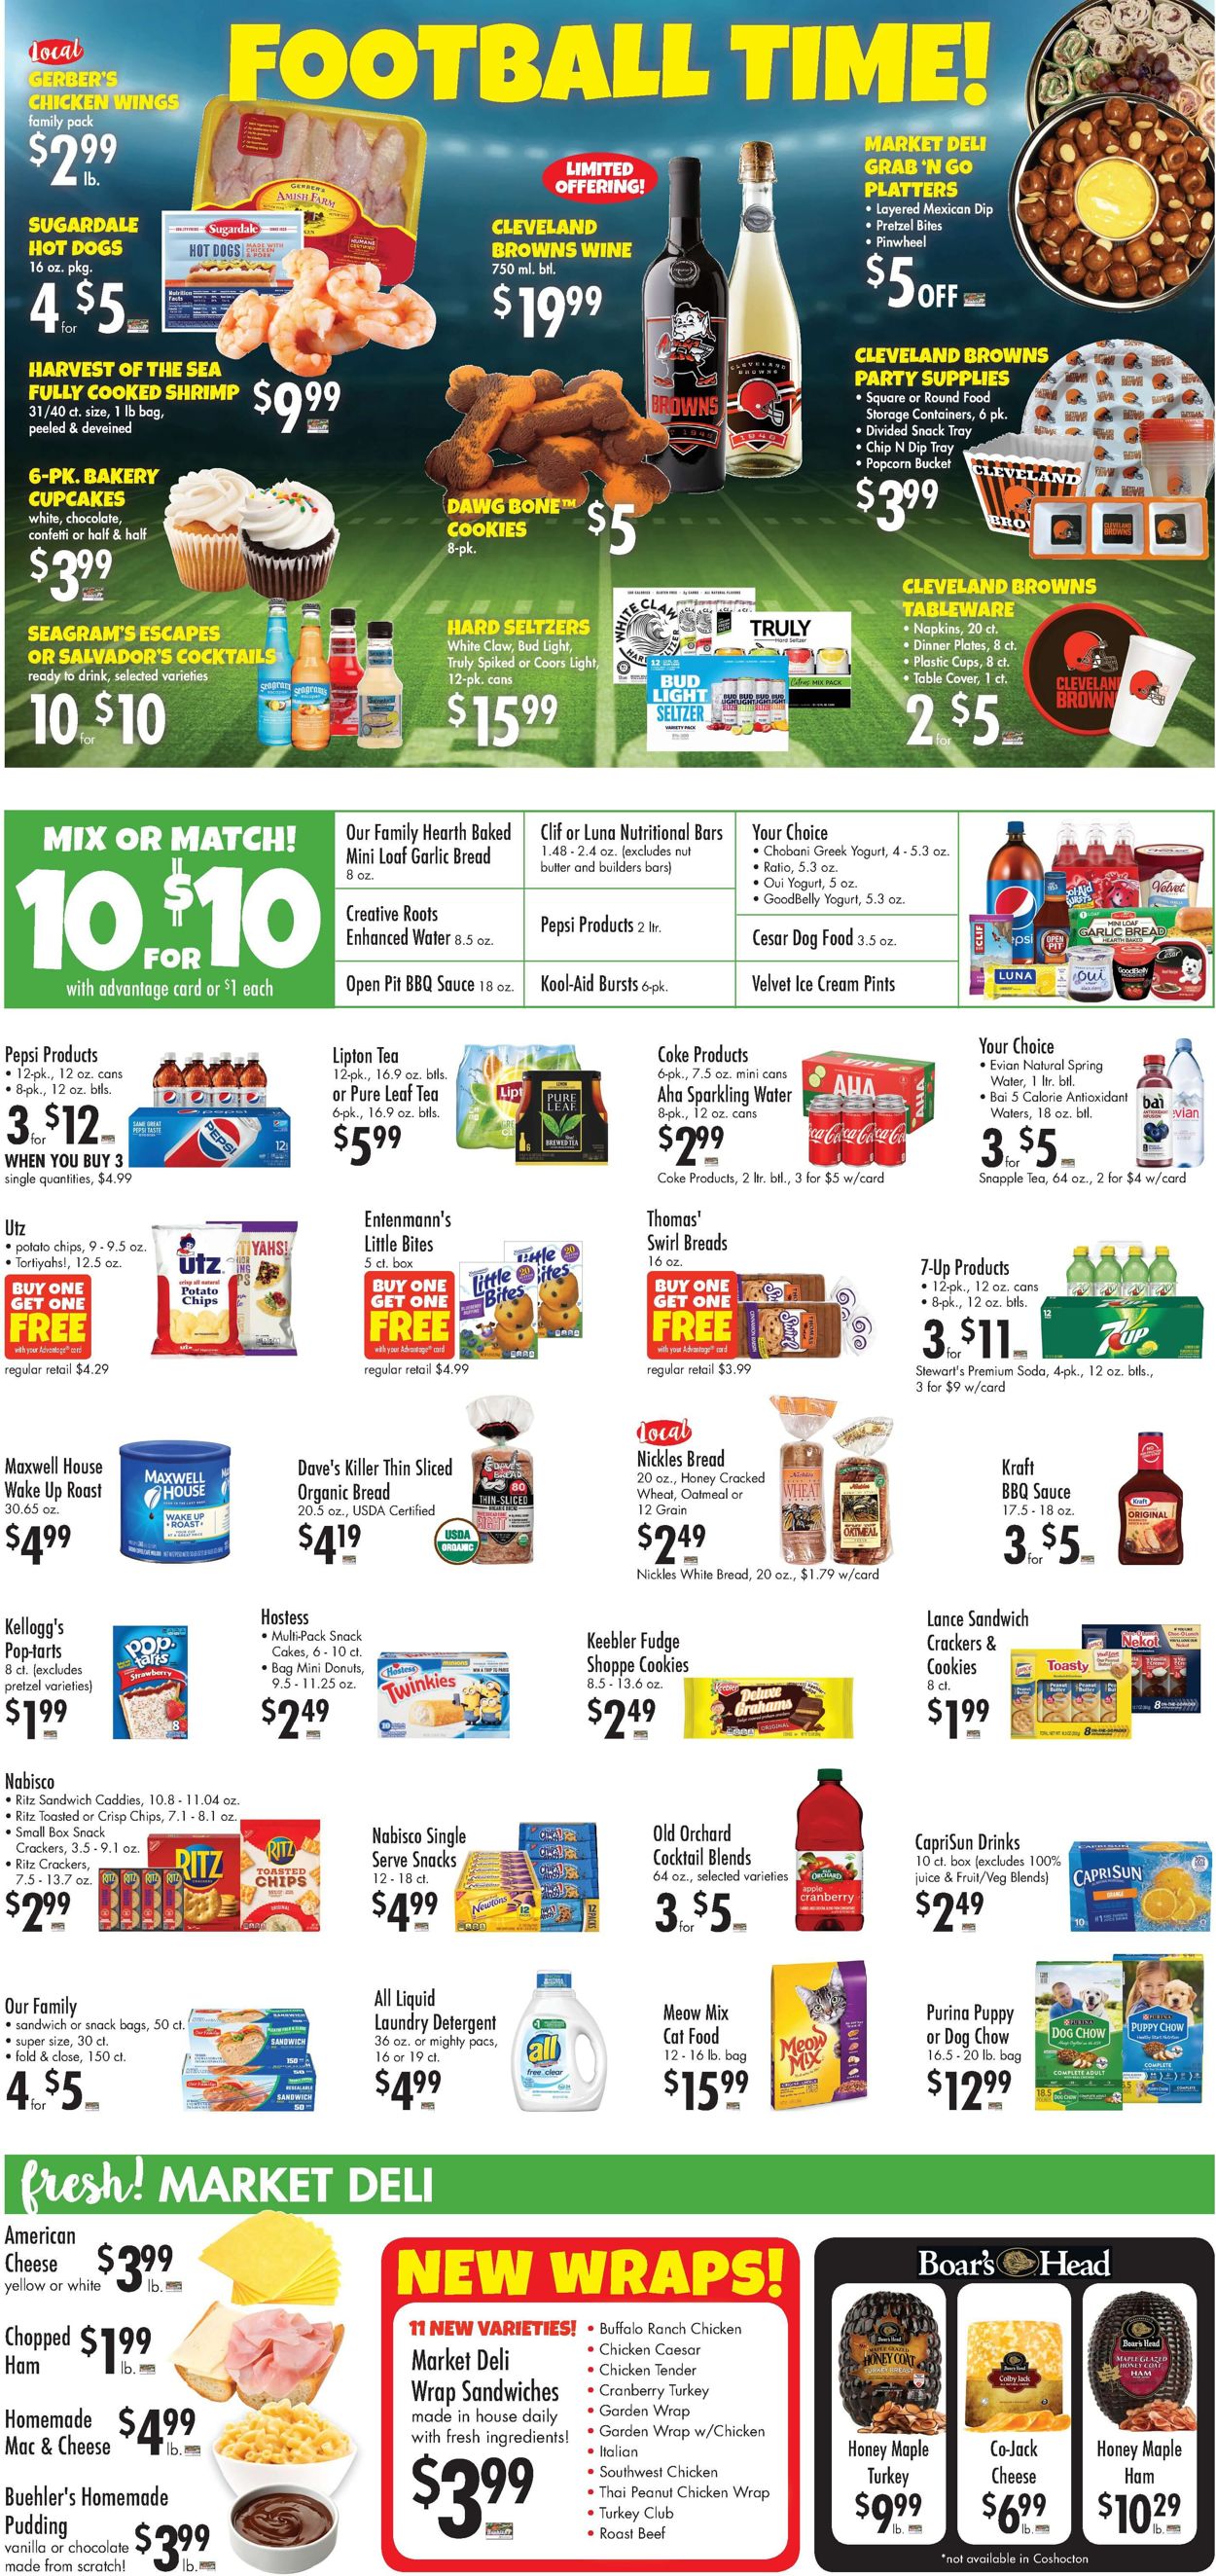 Catalogue Buehler's Fresh Foods from 08/19/2020